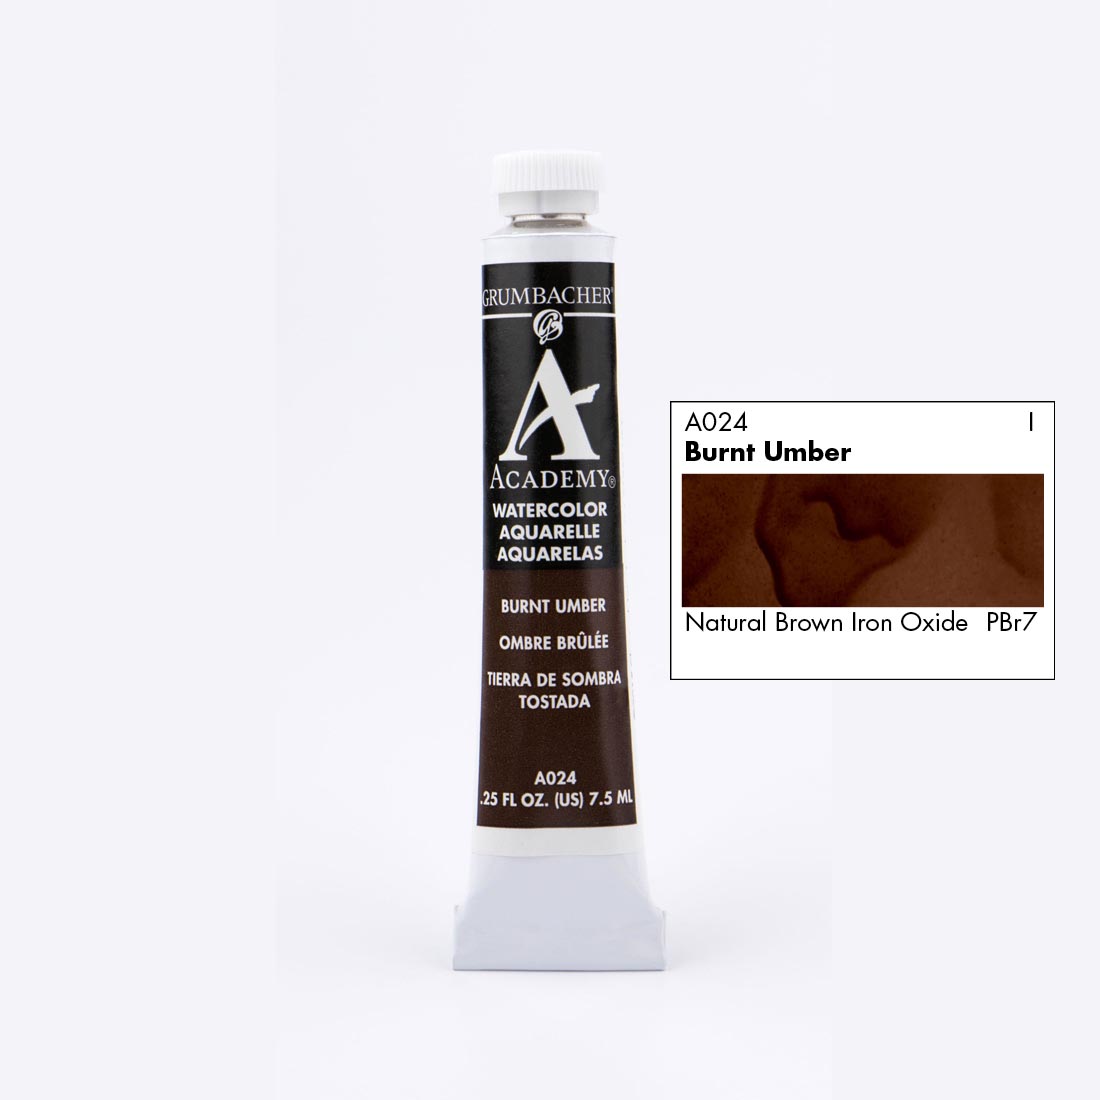 Tube of Grumbacher Academy Watercolor beside Burnt Umber color swatch